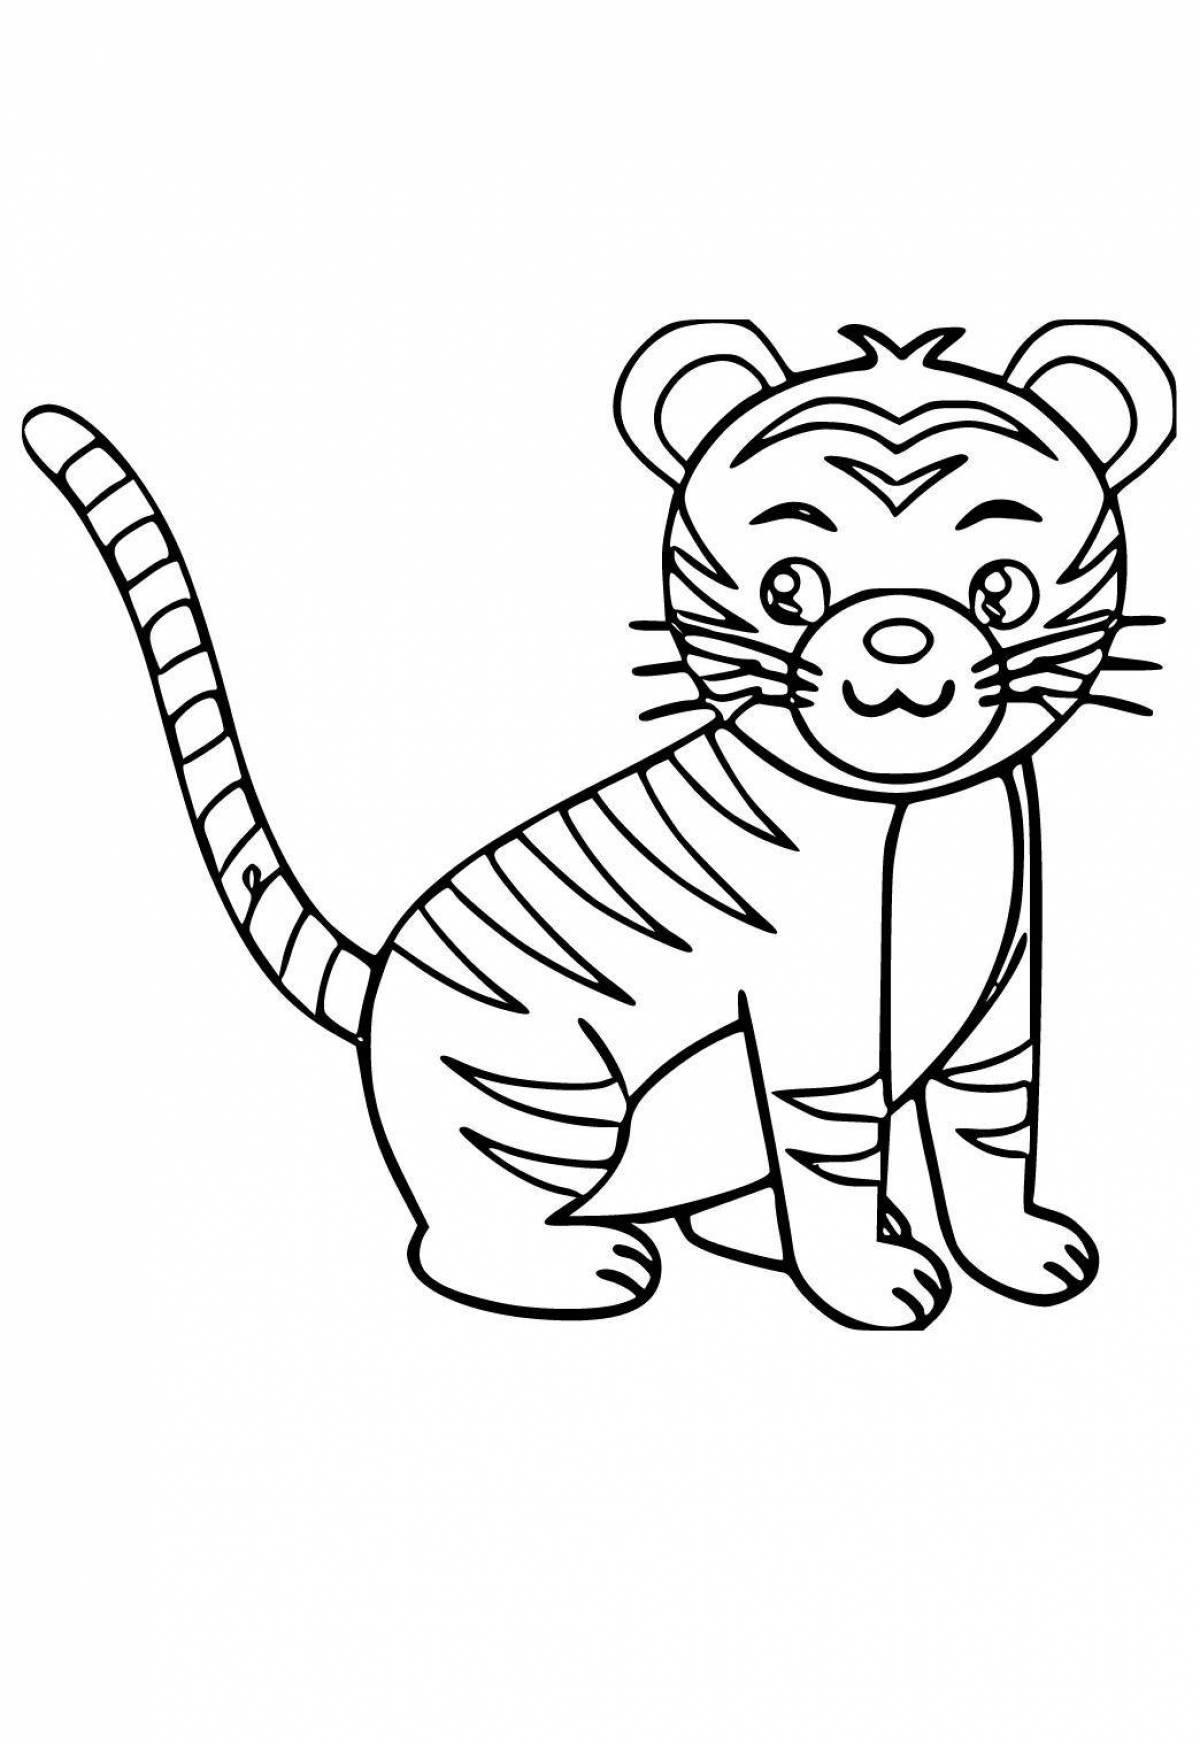 Playful tiger without stripes for kids